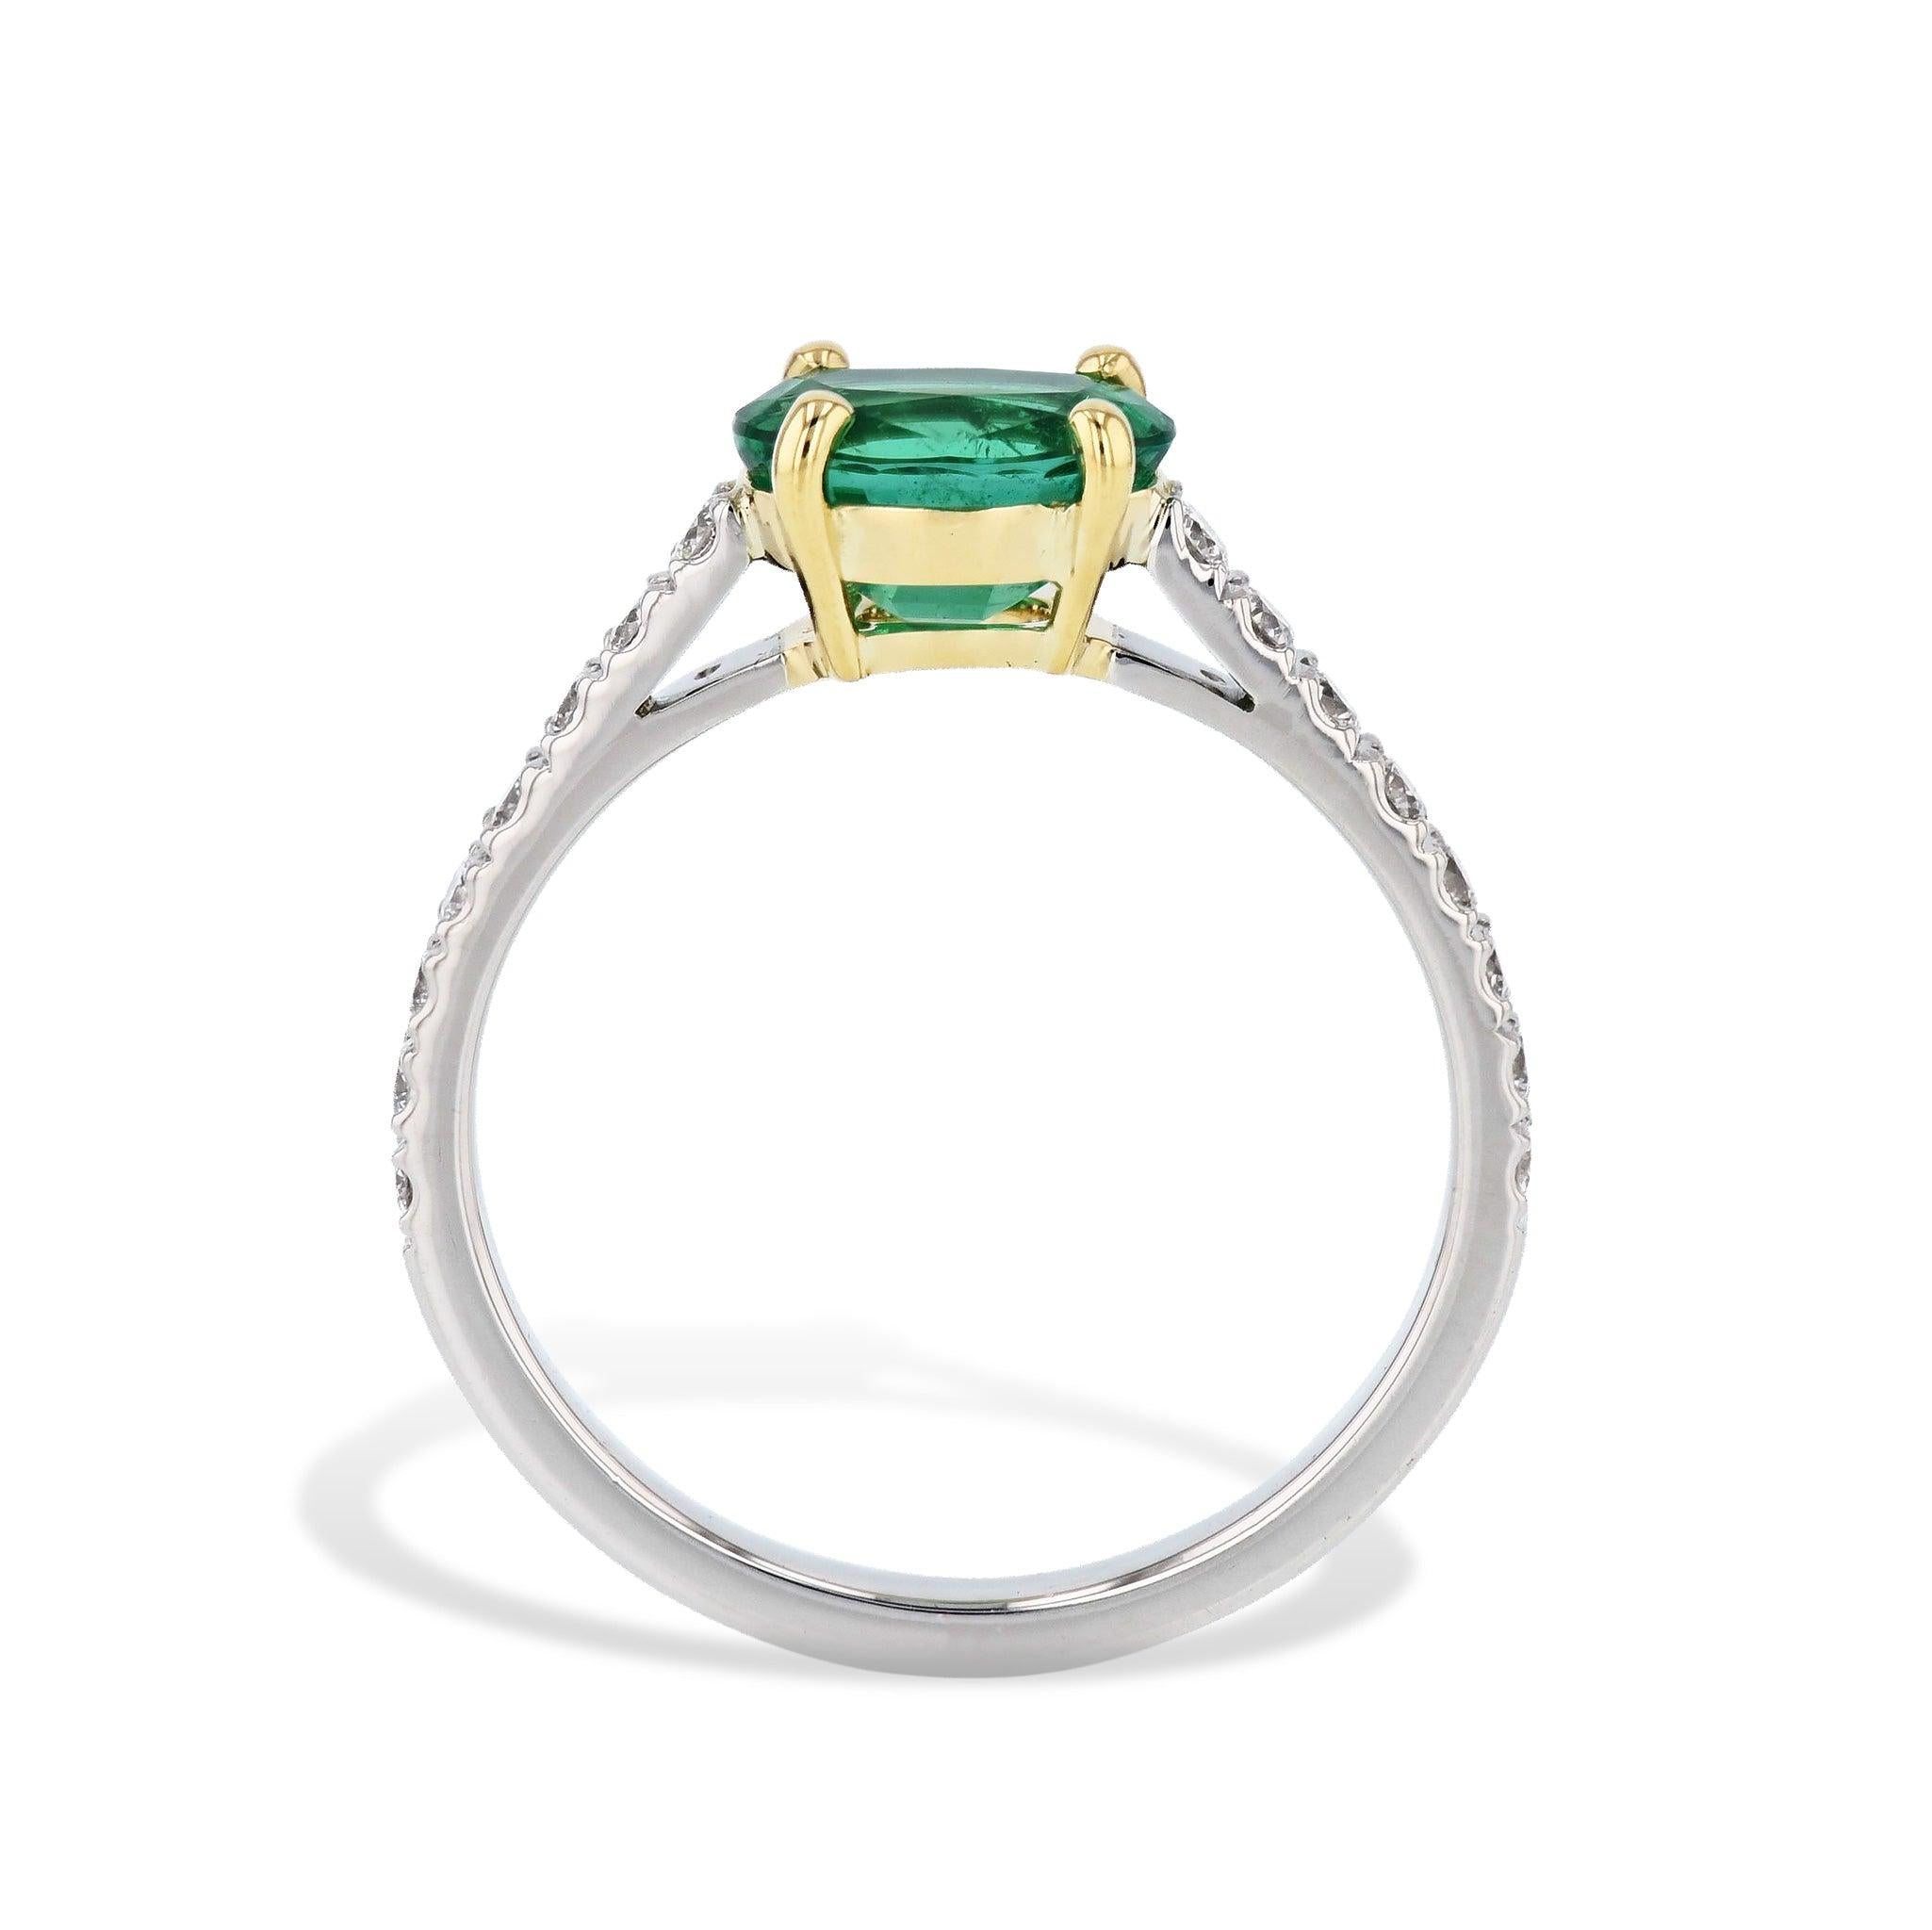 Get ready to be dazzled by this stunning Oval Zambian Emerald Platinum Yellow Gold Ring, featuring an oval cut Zambian emerald of fine quality and accented with diamonds down the shank. Handmade with love and care, this piece from the H&H Collection